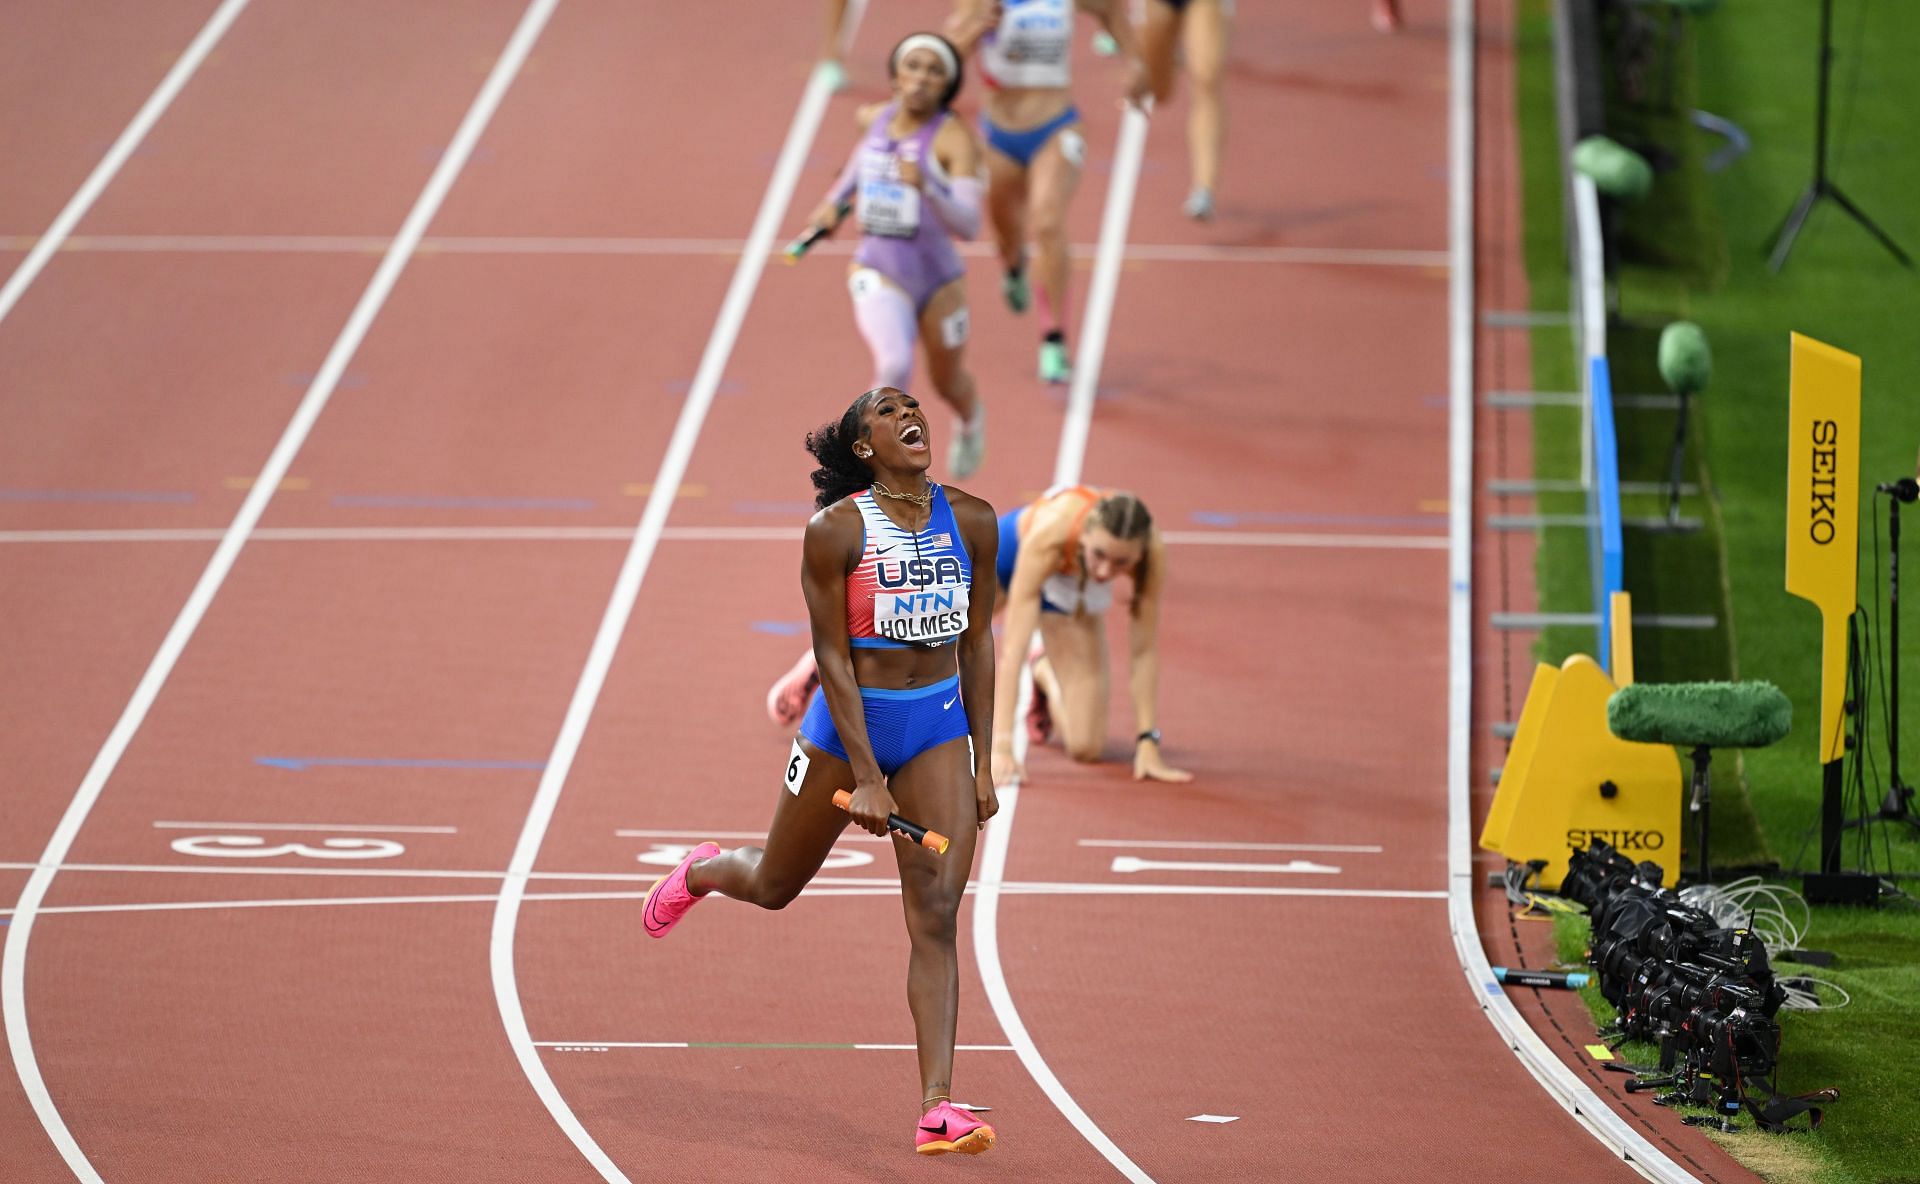 Alexis Holmes at the 2023 World Athletics Championships in Budapest.